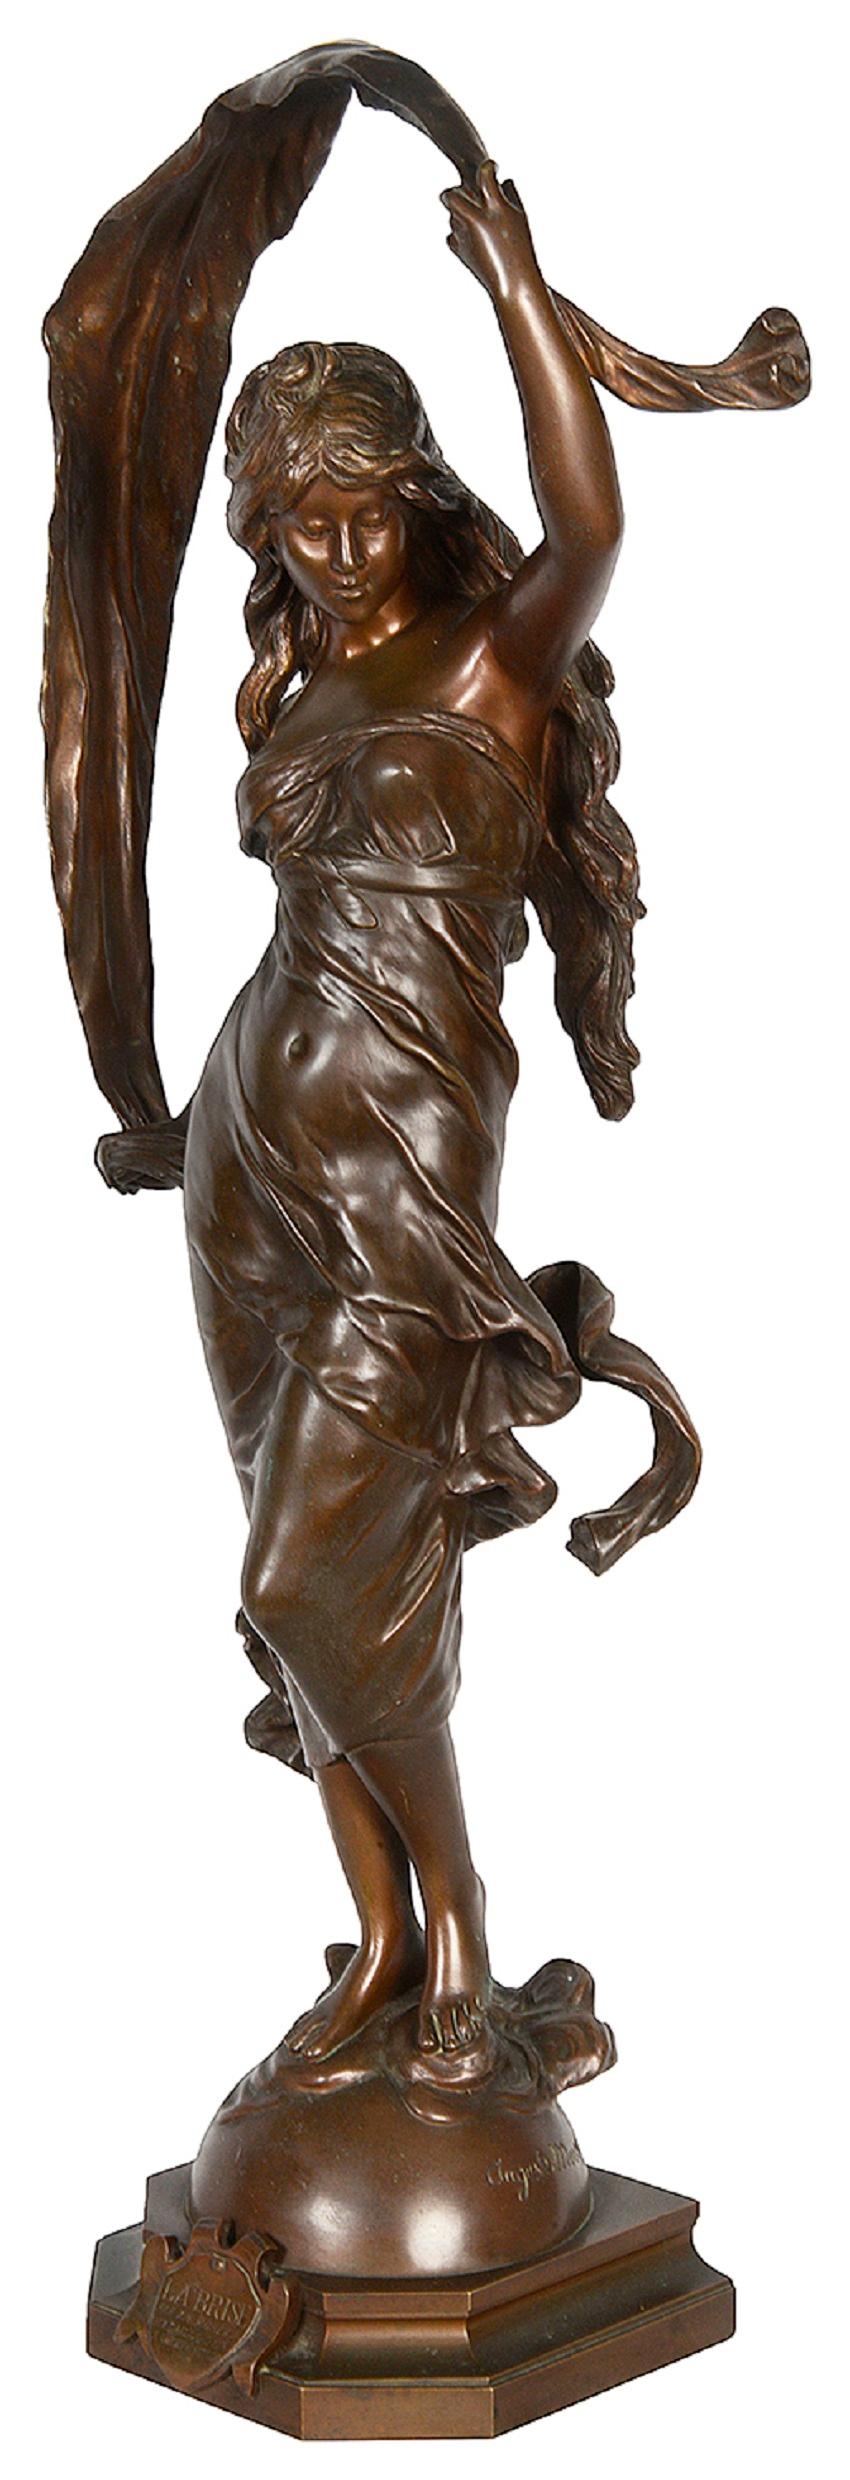 A fine quality late 19th Century patinated bronze sculpture entitled 'The Breeze' by Auguste Moreau.

Auguste Moreau (1834 – 1917) was a French sculptor born in Dijon. The third and youngest son of sculptor and painter Jean-Baptiste Moreau, Auguste